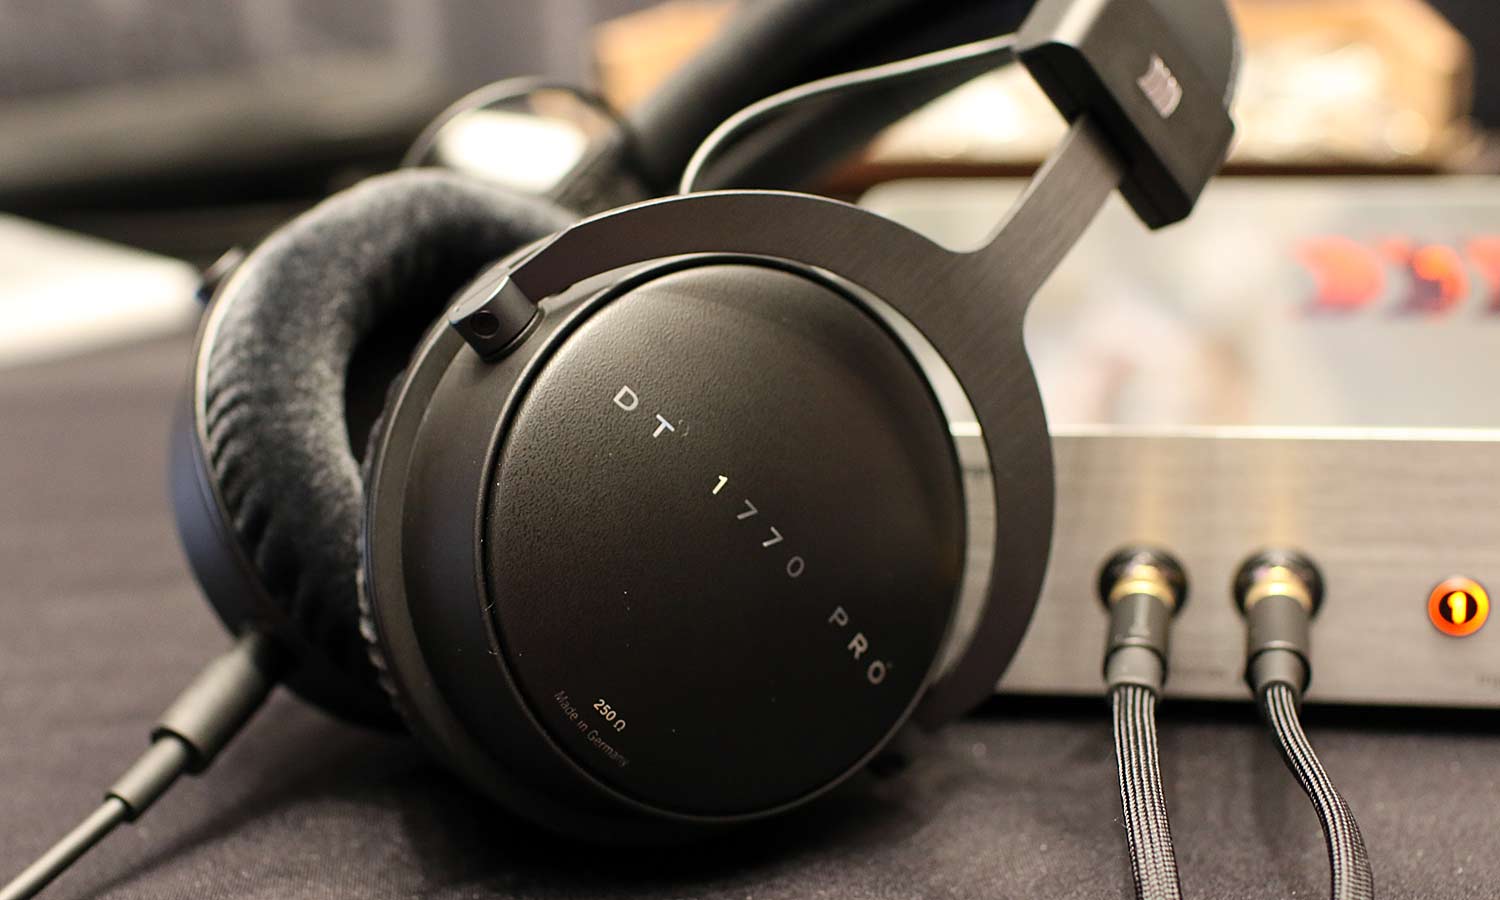 Beyerdynamic DT 1770 Pro Hands-On: Musical Masterpiece | Tom's Guide